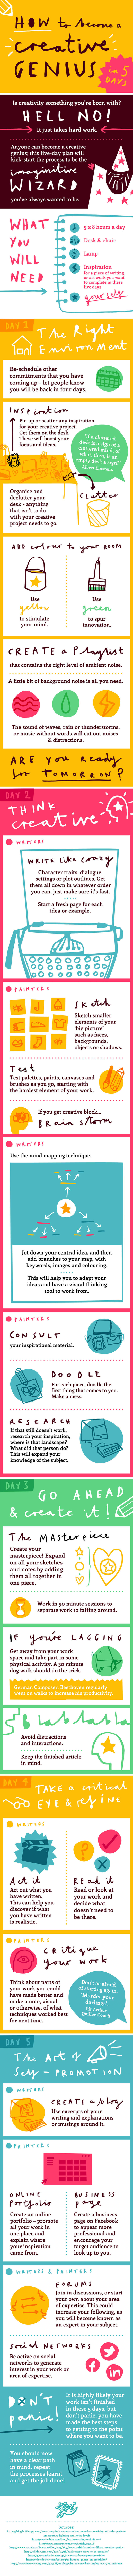 Be a Creative genious infpgraphic